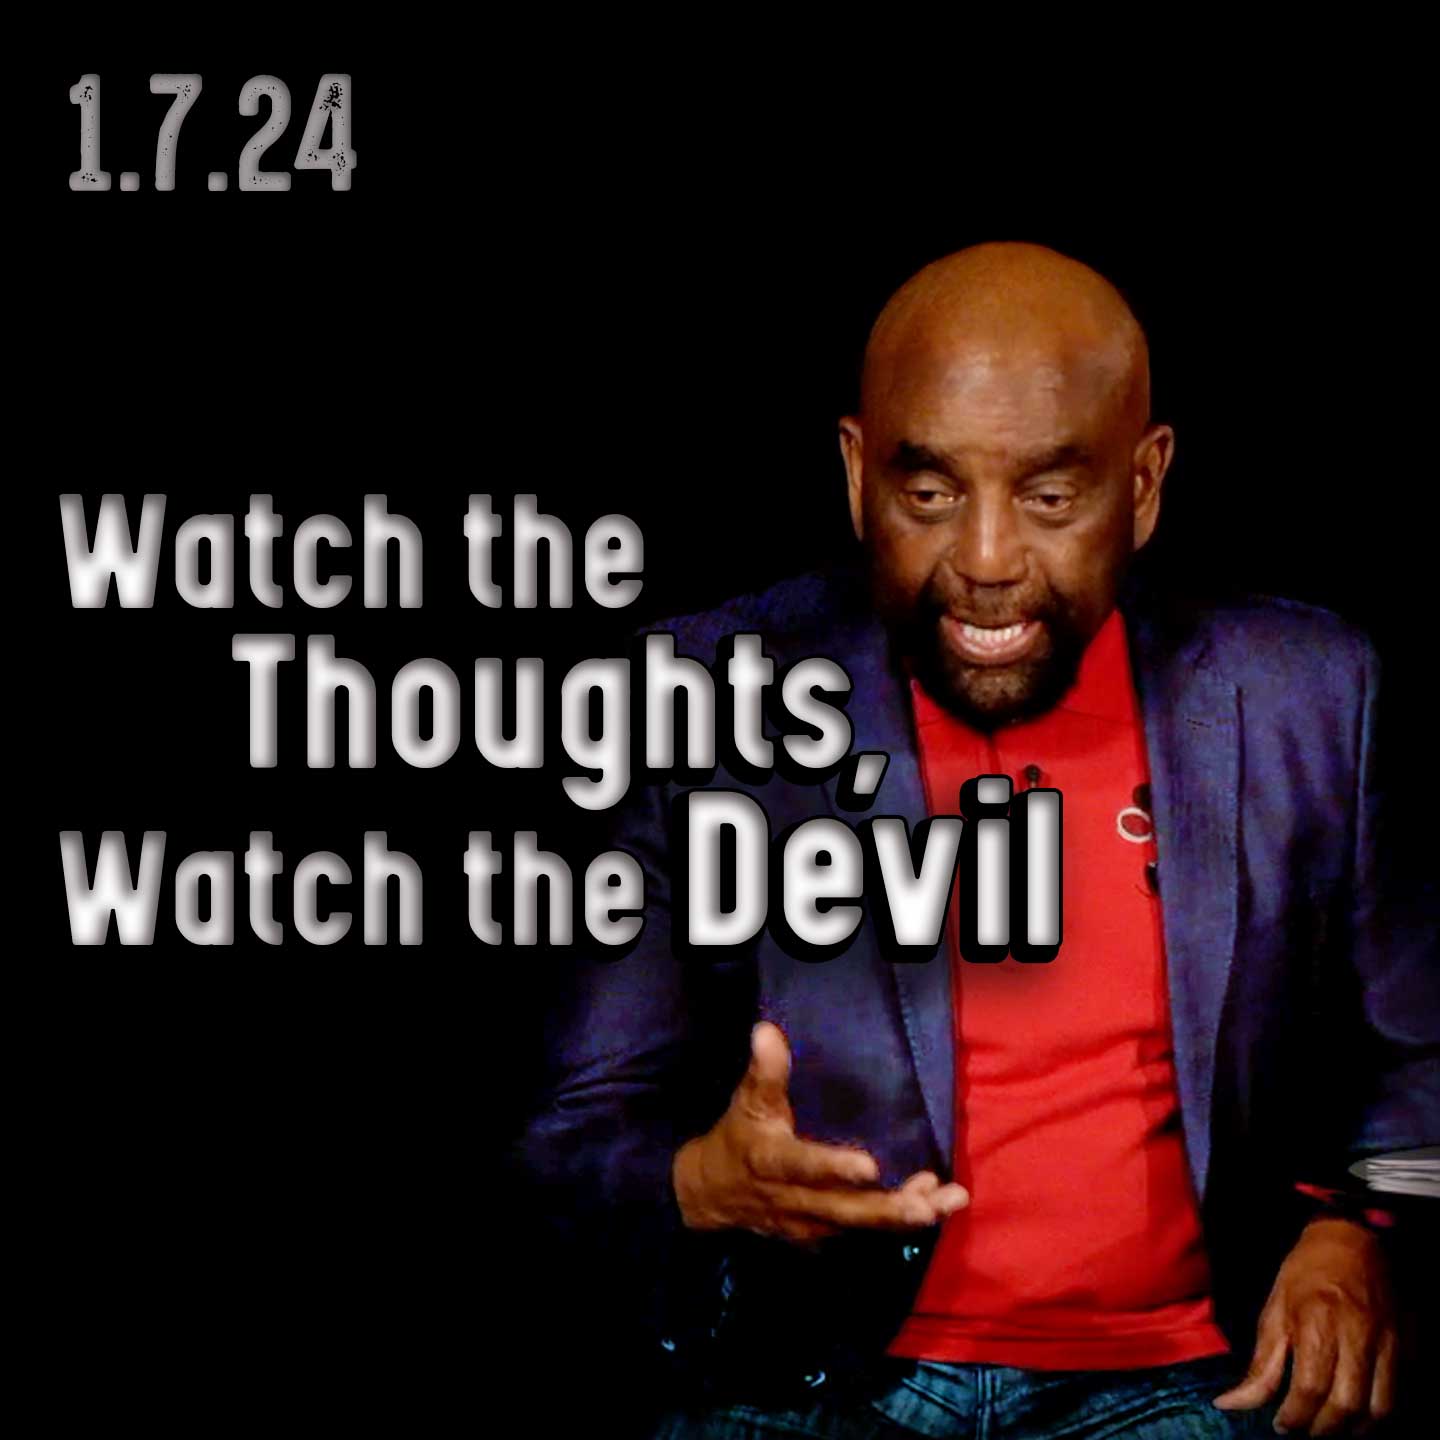 Which do you love more, your real life or your false life? Church 1/7/24 Watch the thoughts, watch the Devil